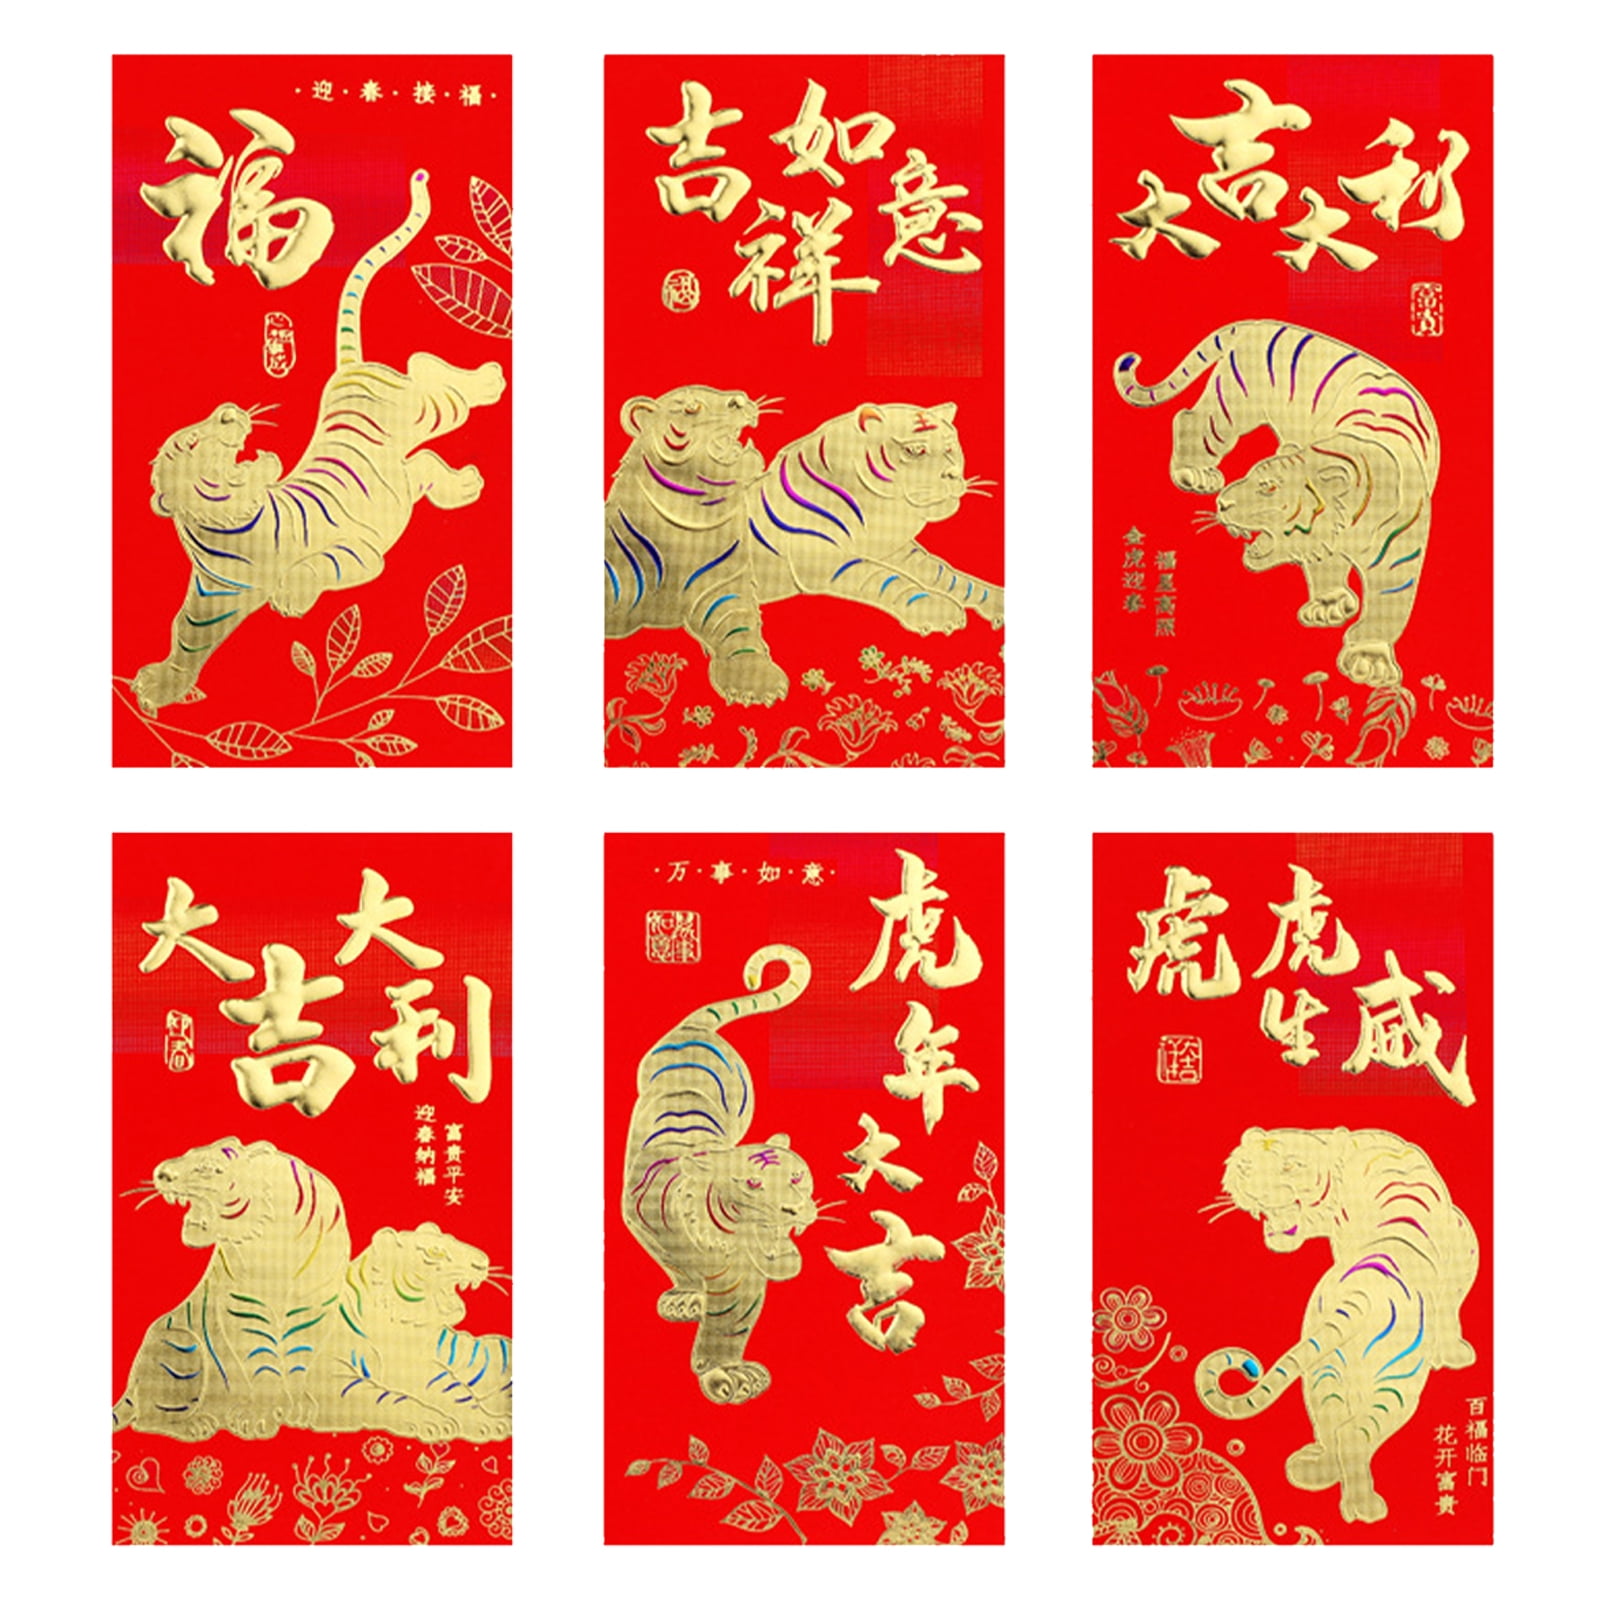 New Year Spring Festival Hong Bao Lucky Money Envelope Packet 12X2 24 Pack Chinese Red Envelopes 24 Pcs Brilliant Traditional Chinese Pictures Design